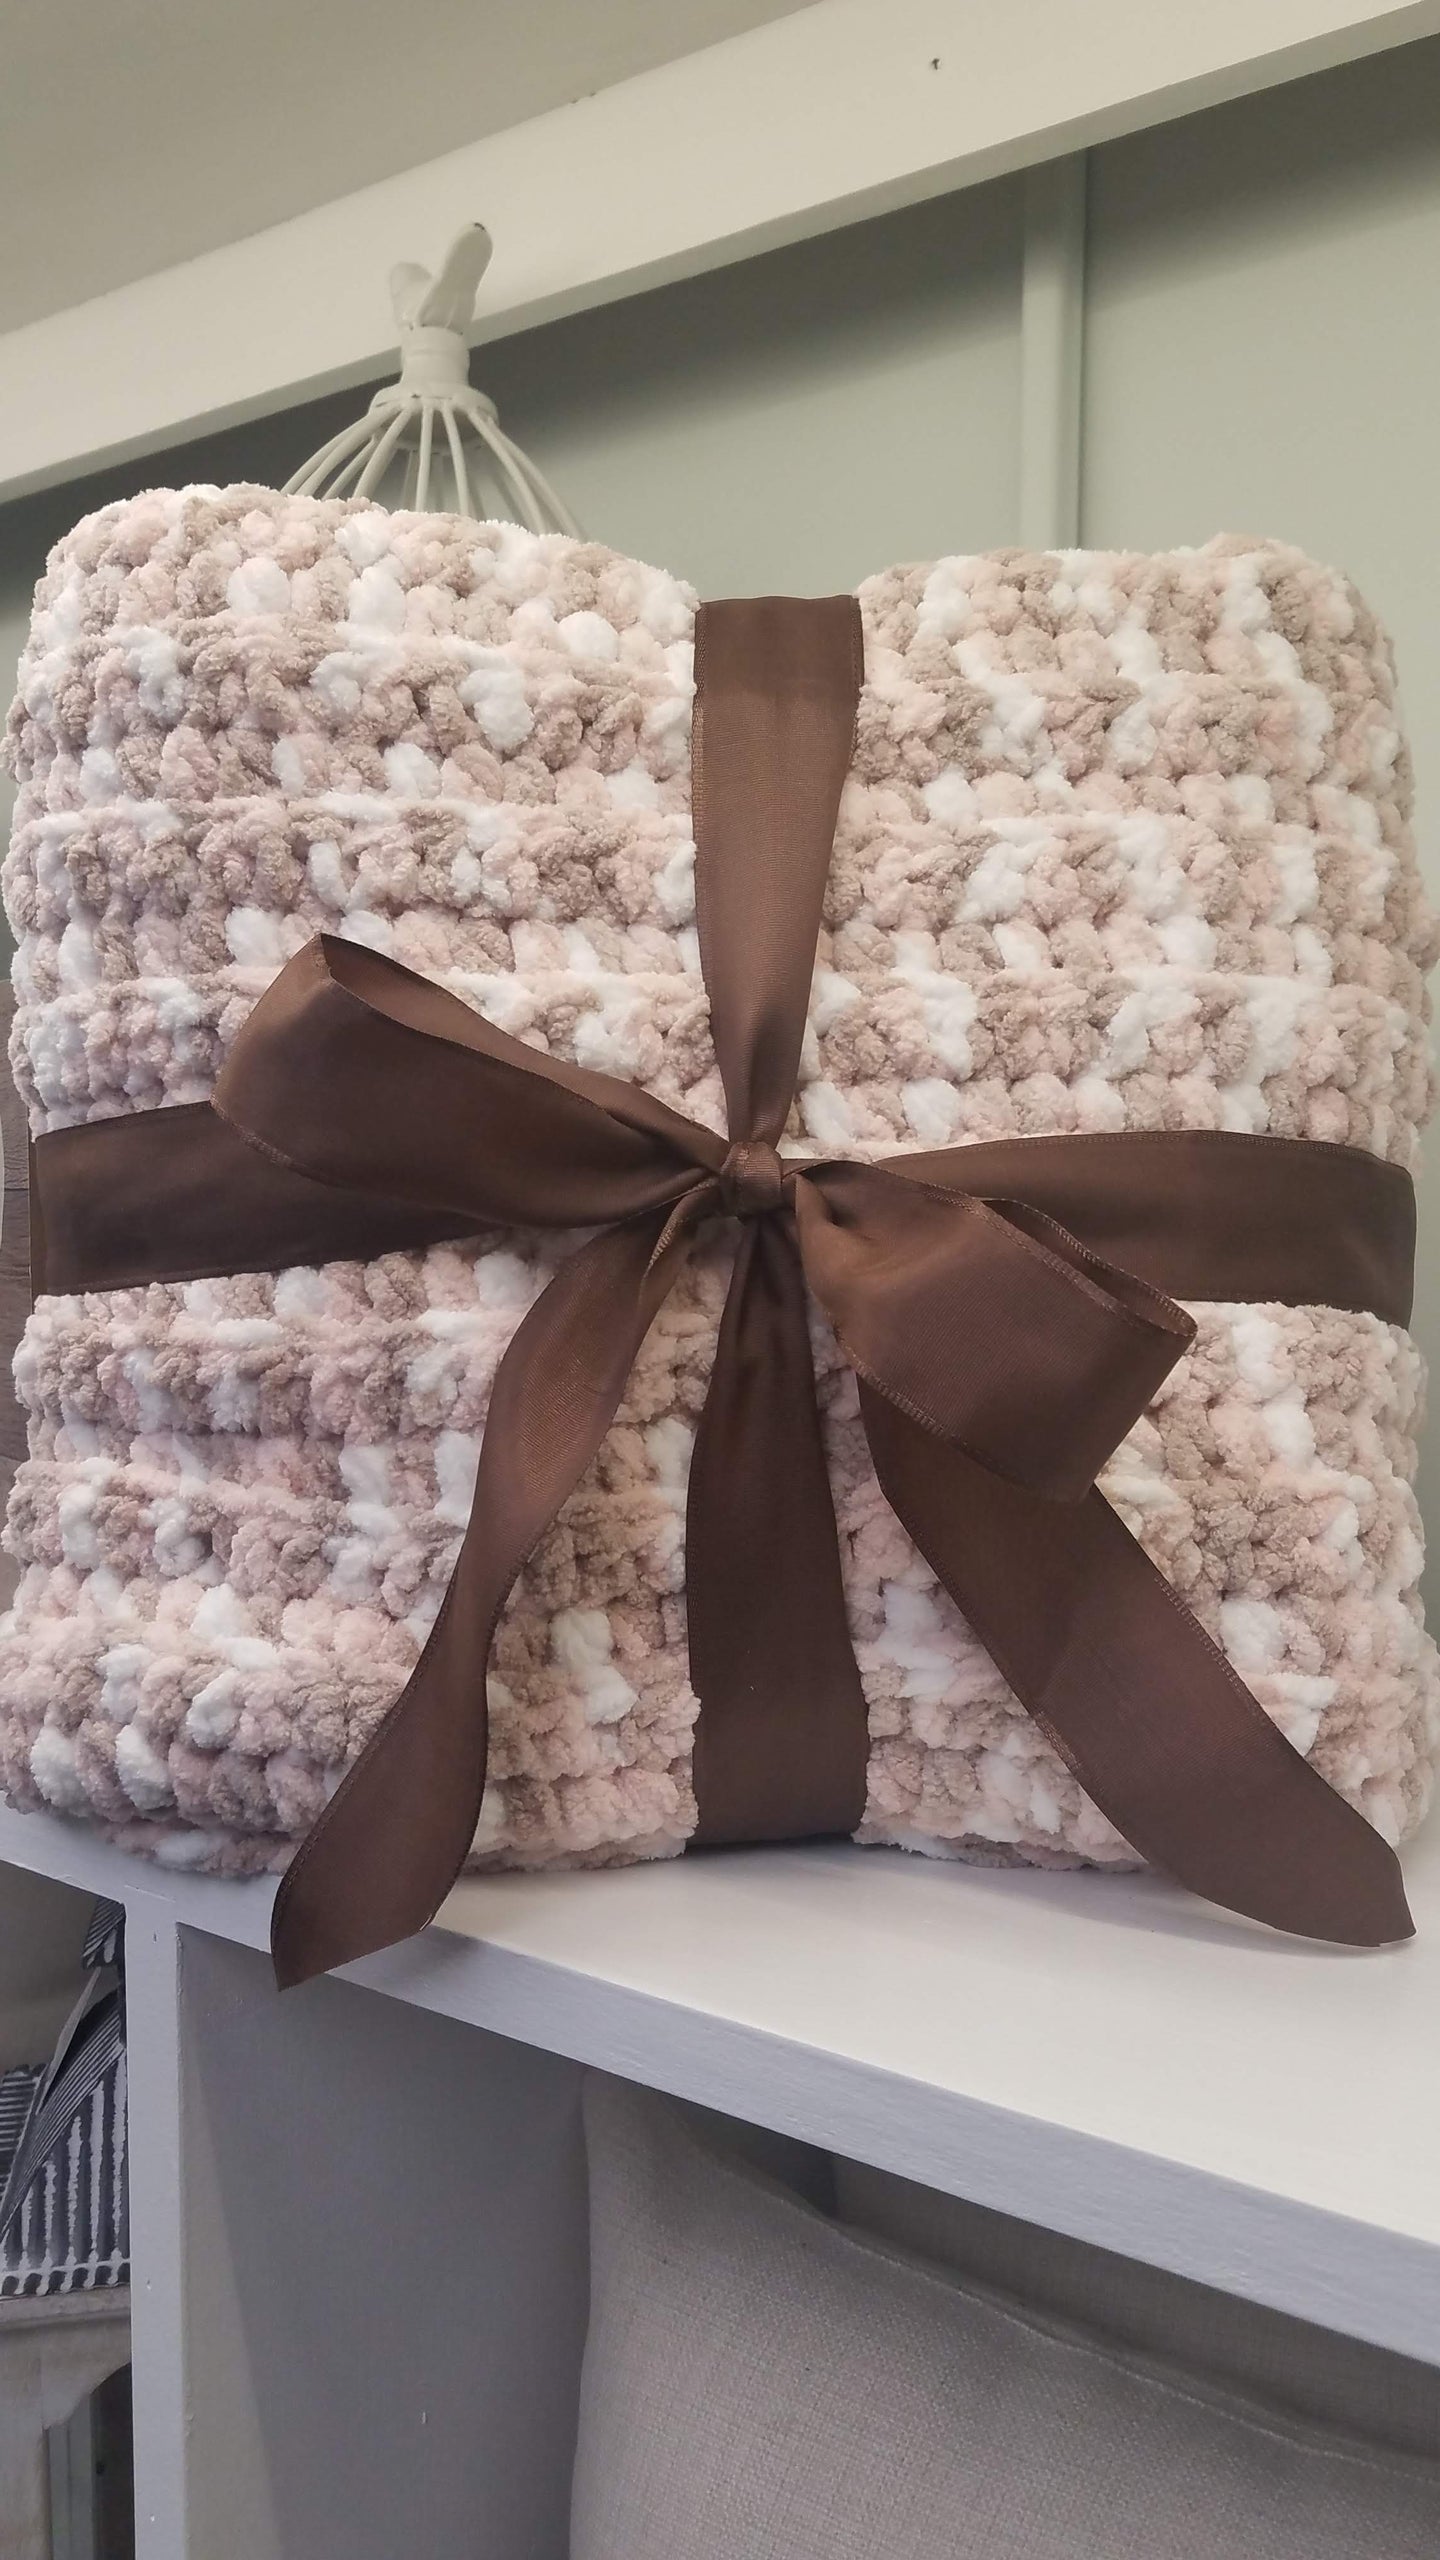 Soft & Chunky Throw - Soft Pink, Brown and White Blend